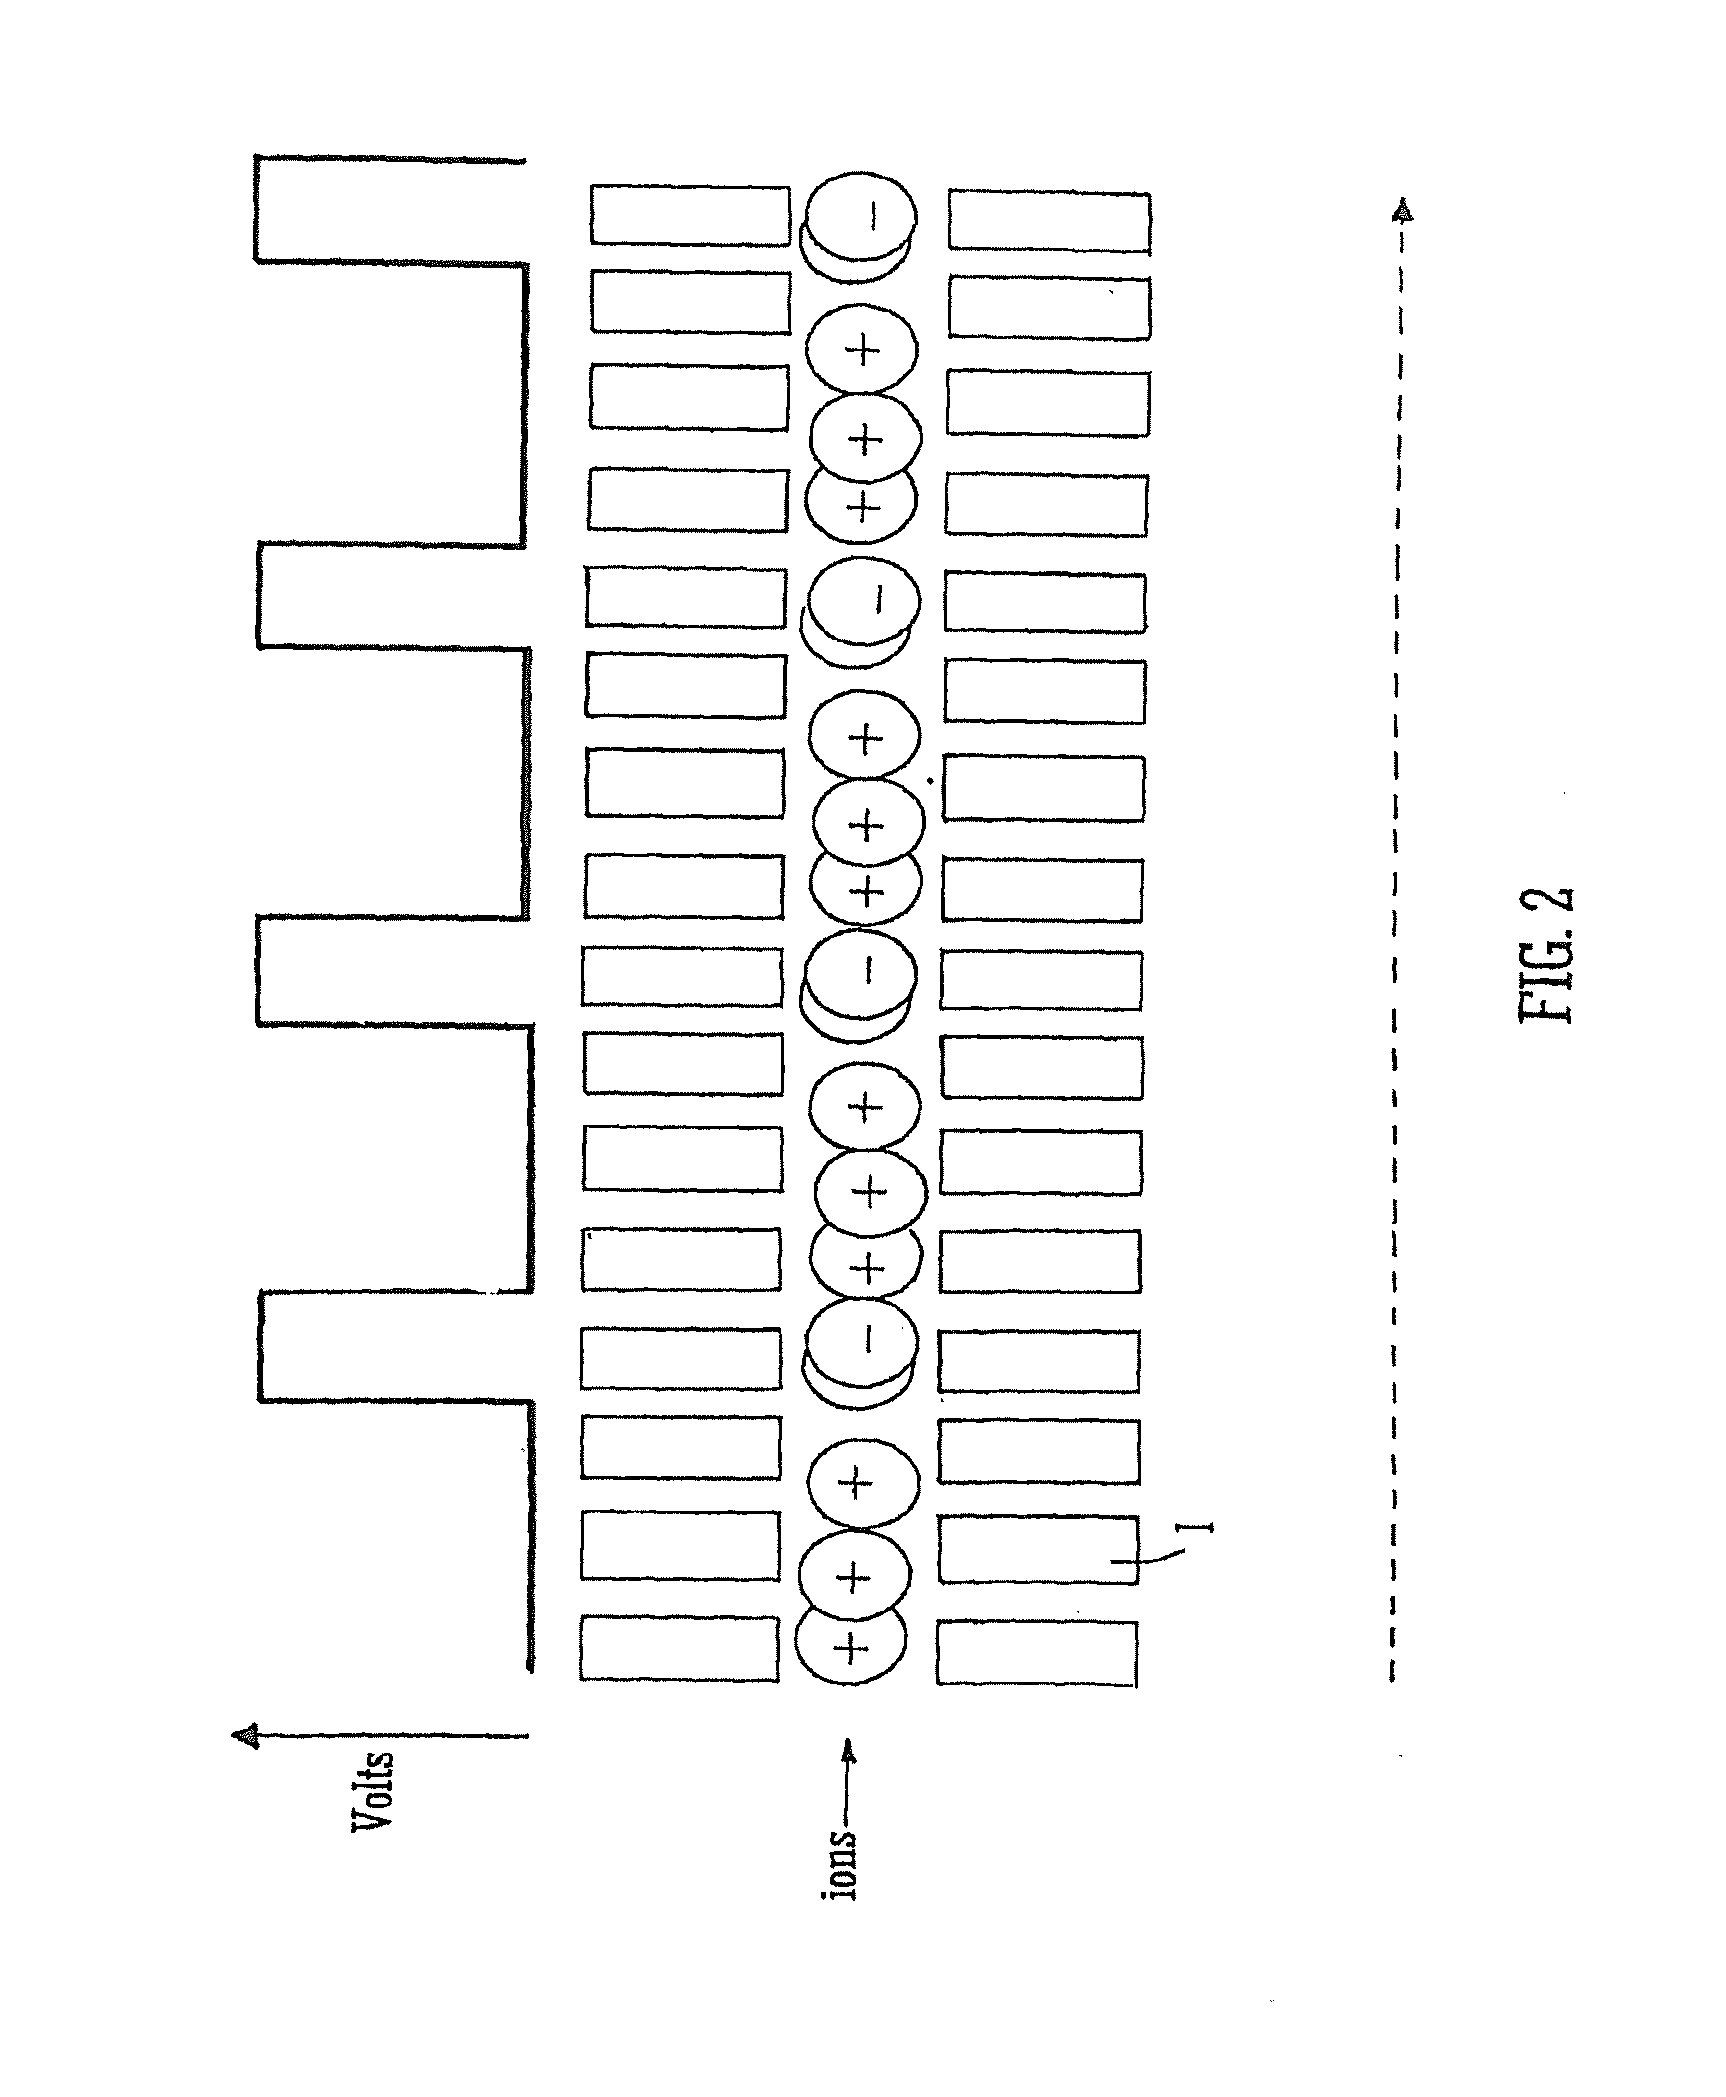 Method of Charge Reduction of Electron Transfer Dissociation Product Ions